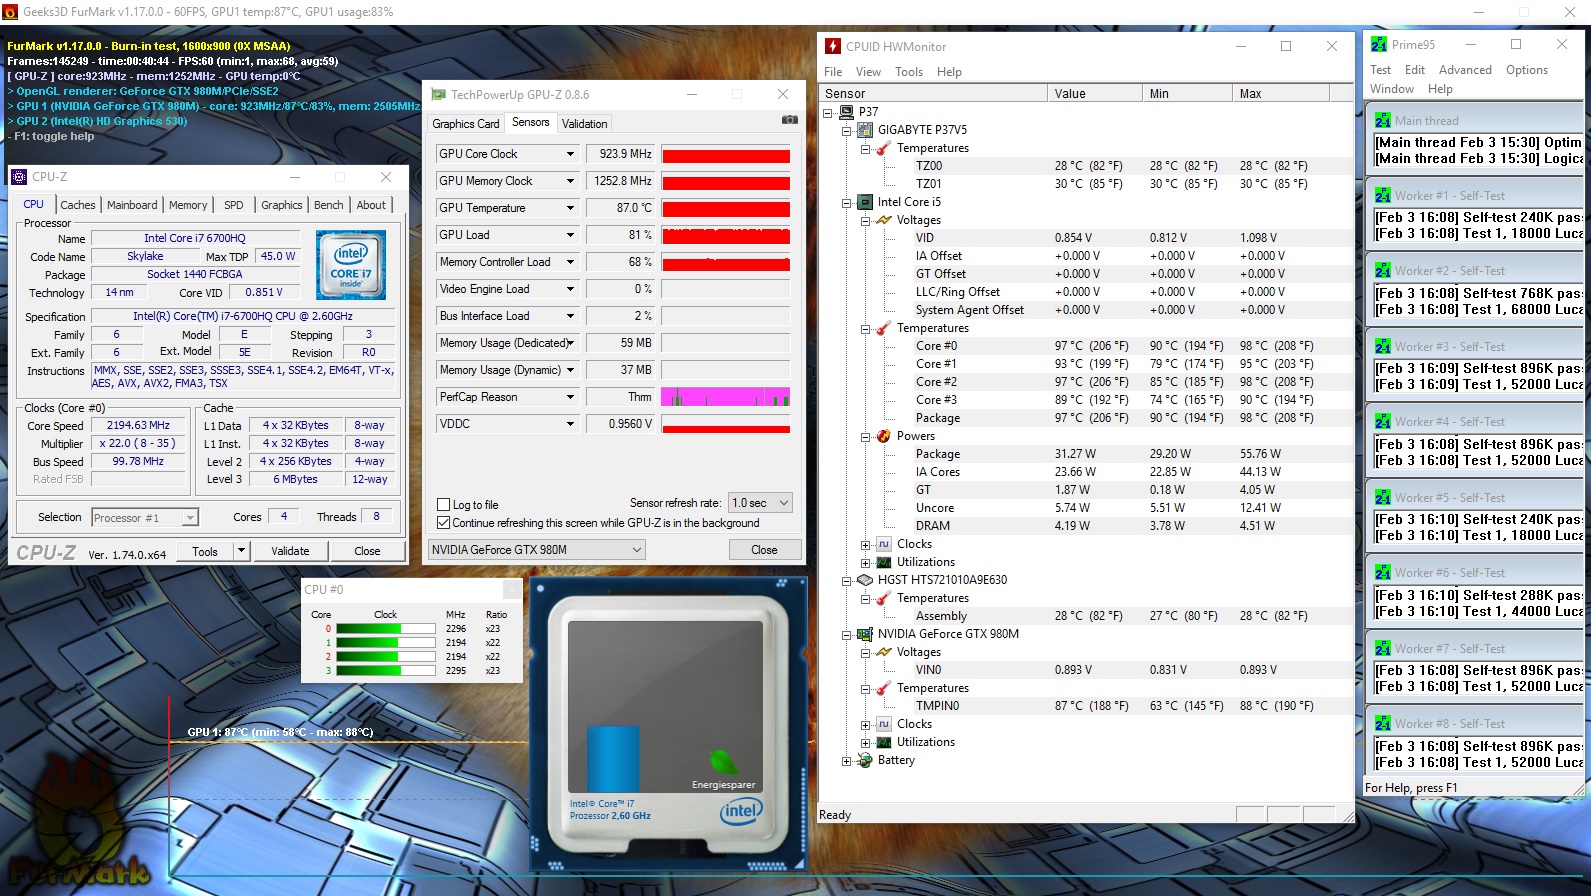 Don't Let Your Hardware Burn Out: Control Your Temps with HWMonitor